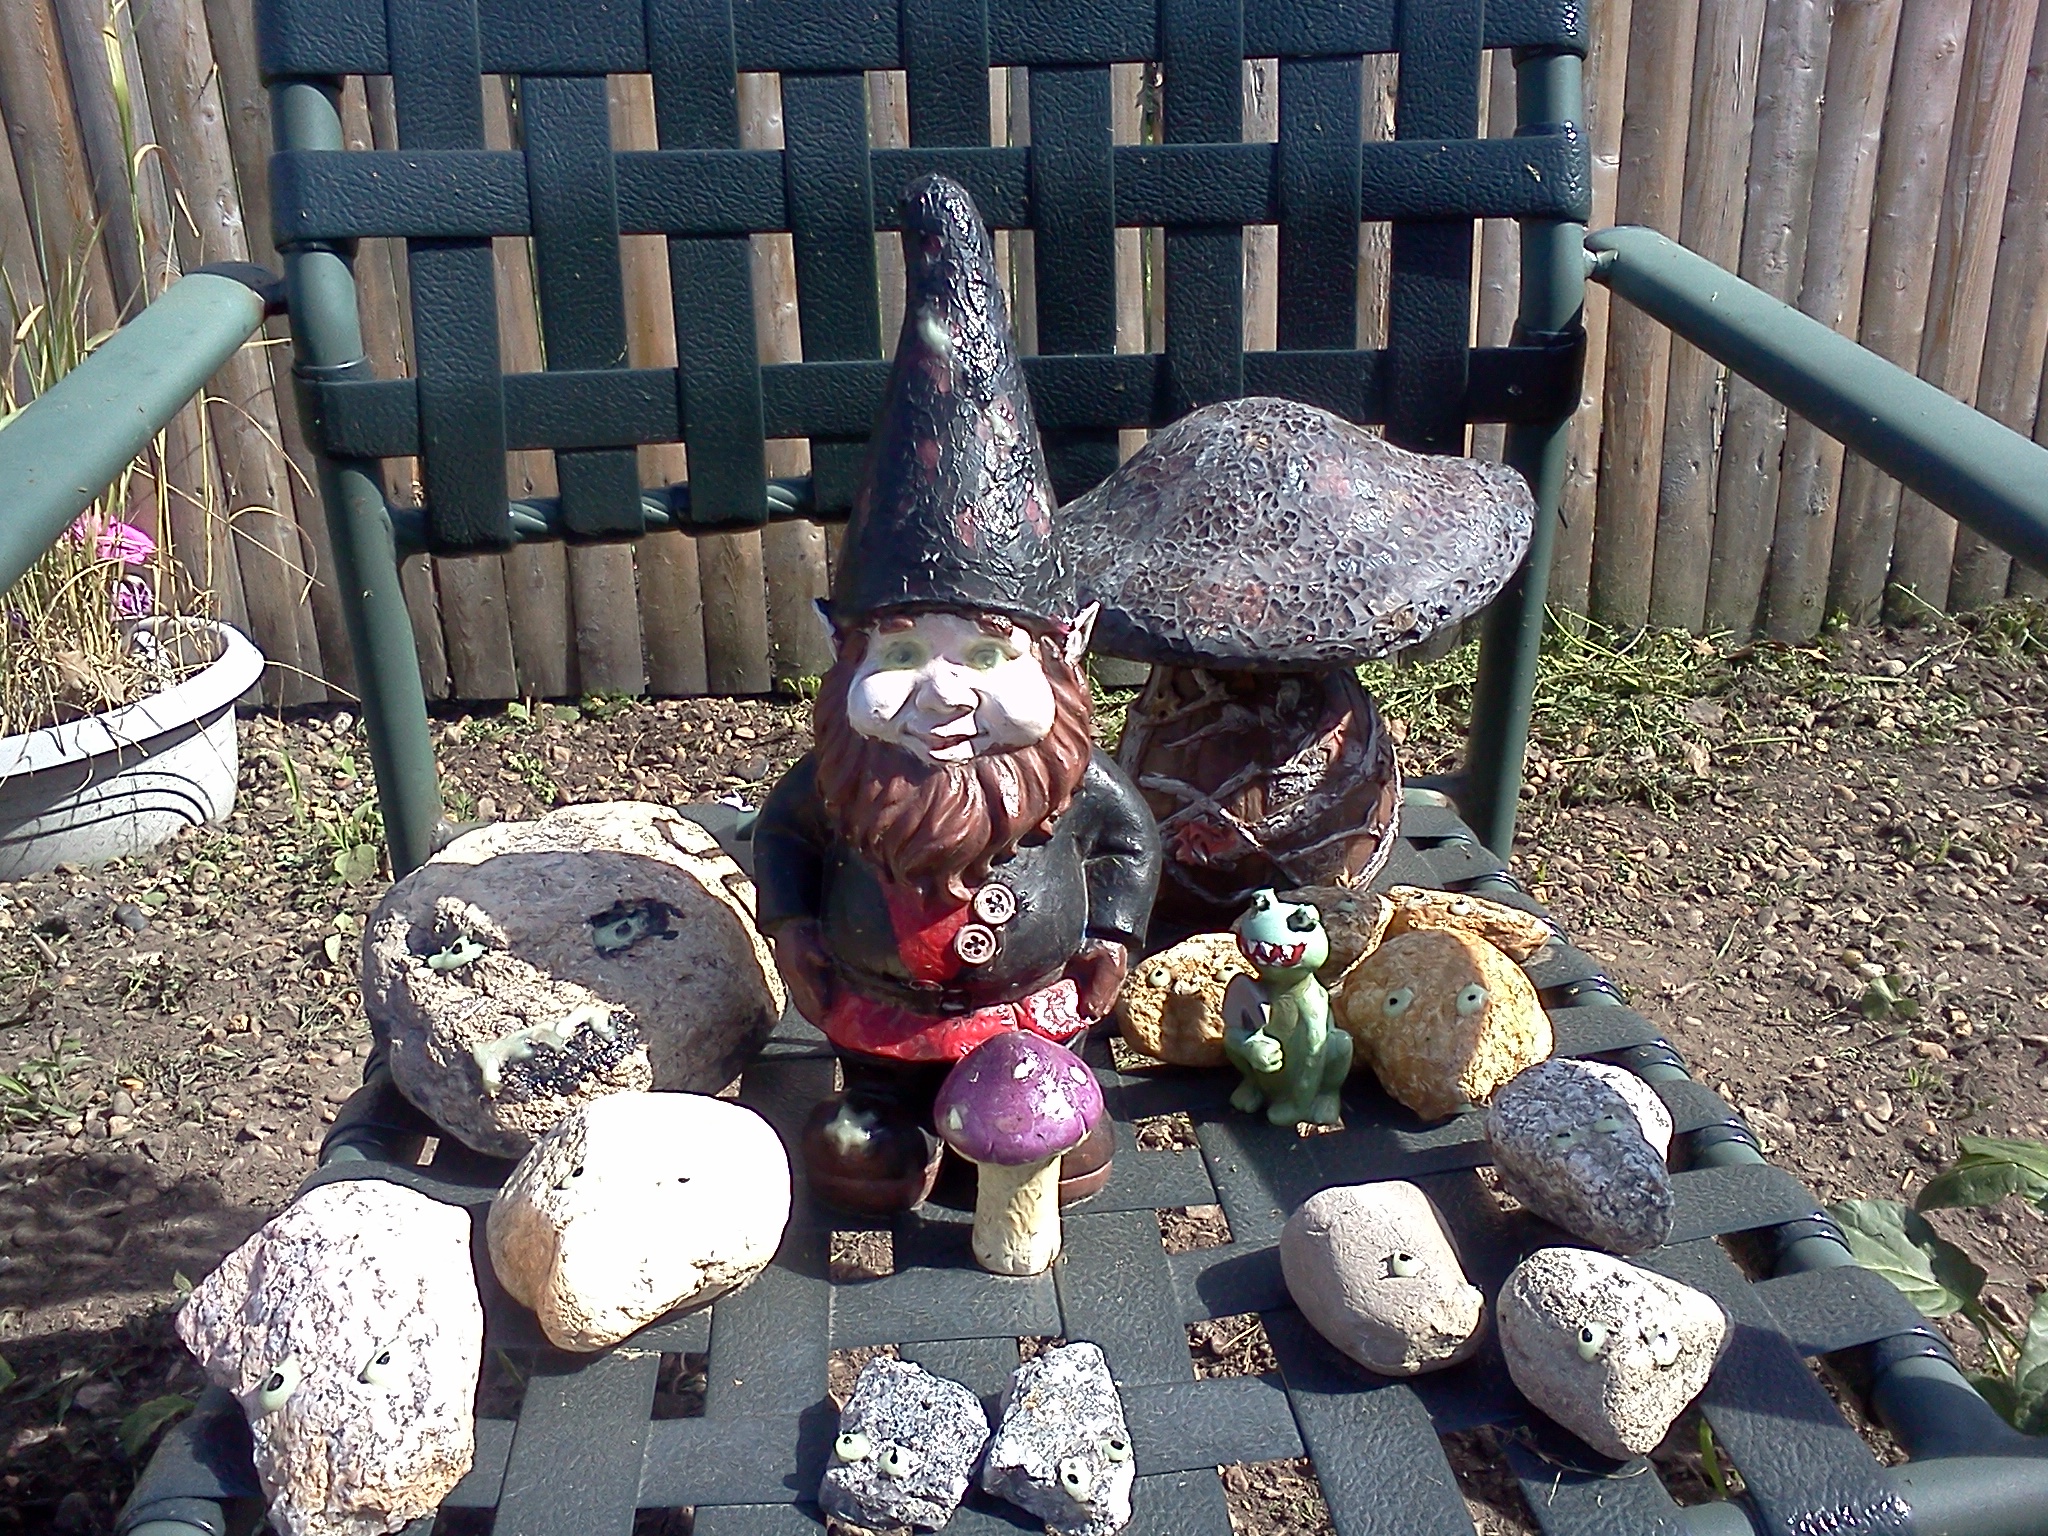 Rufus The Slightly Evil Lawn Gnome By Thedukeofweasels On Deviantart